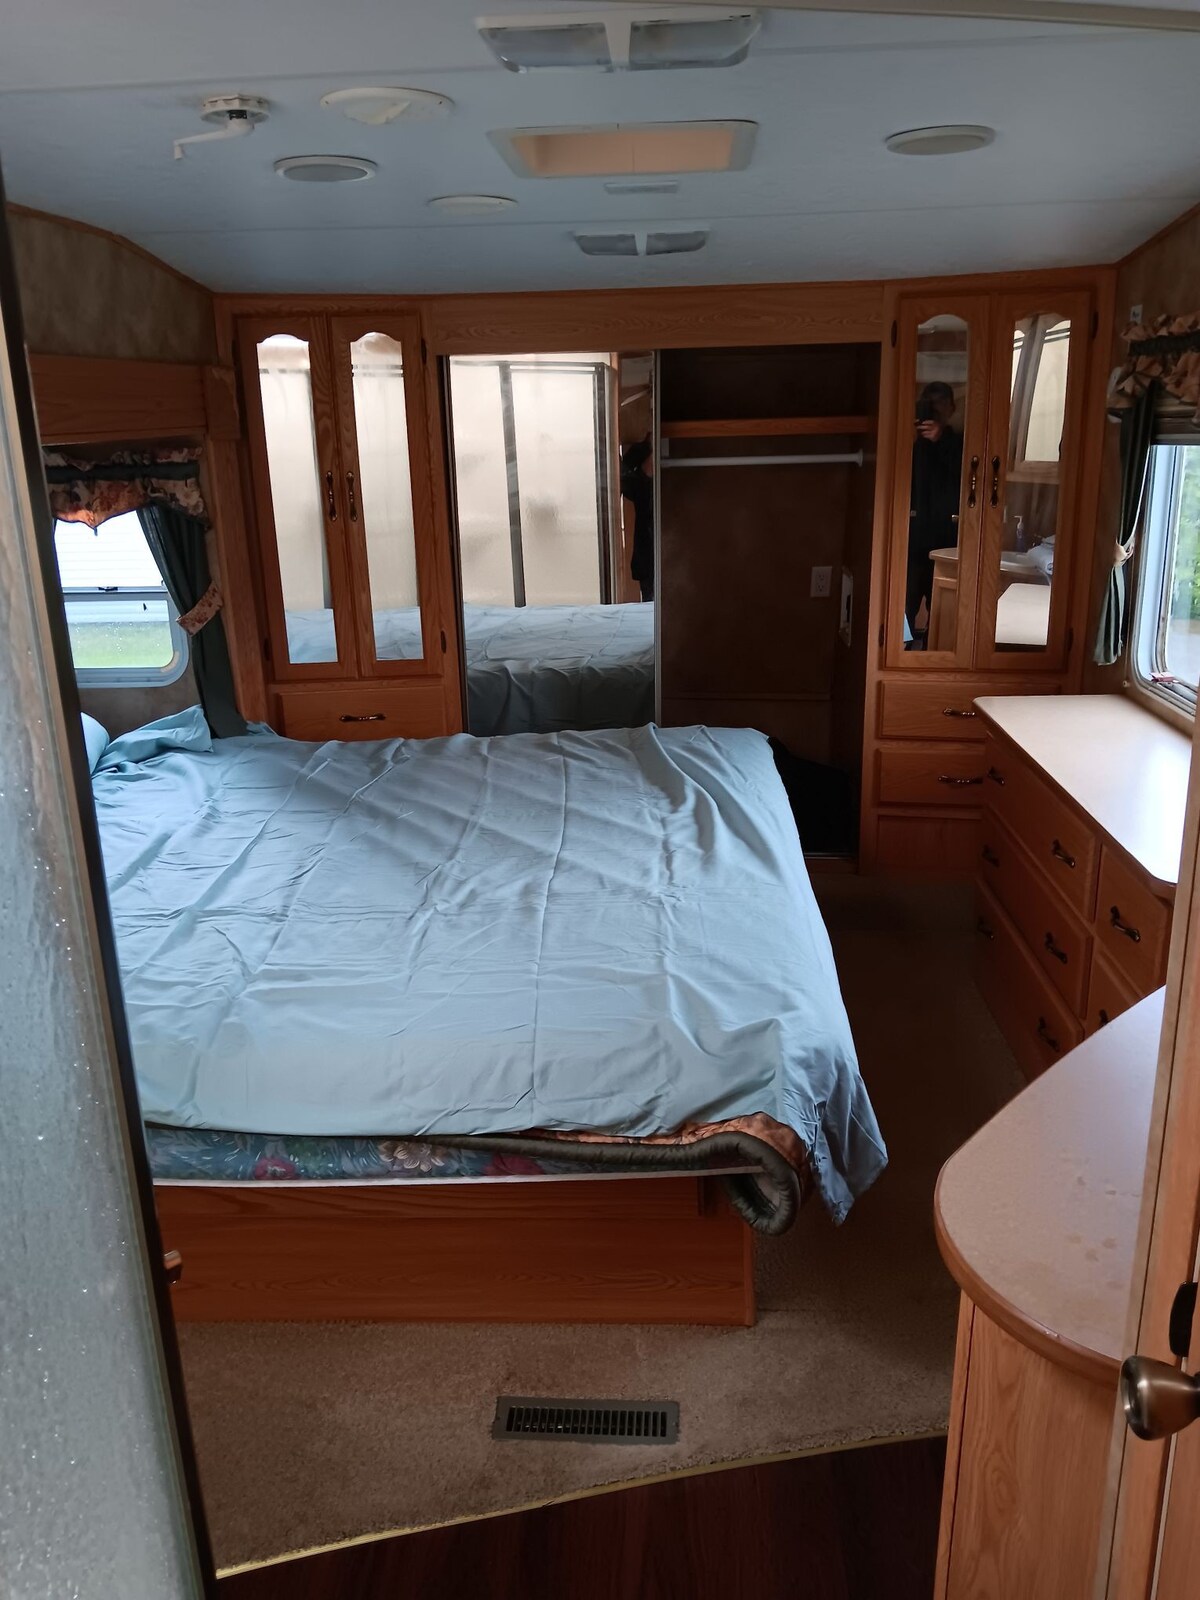 Private lot with 5th wheel